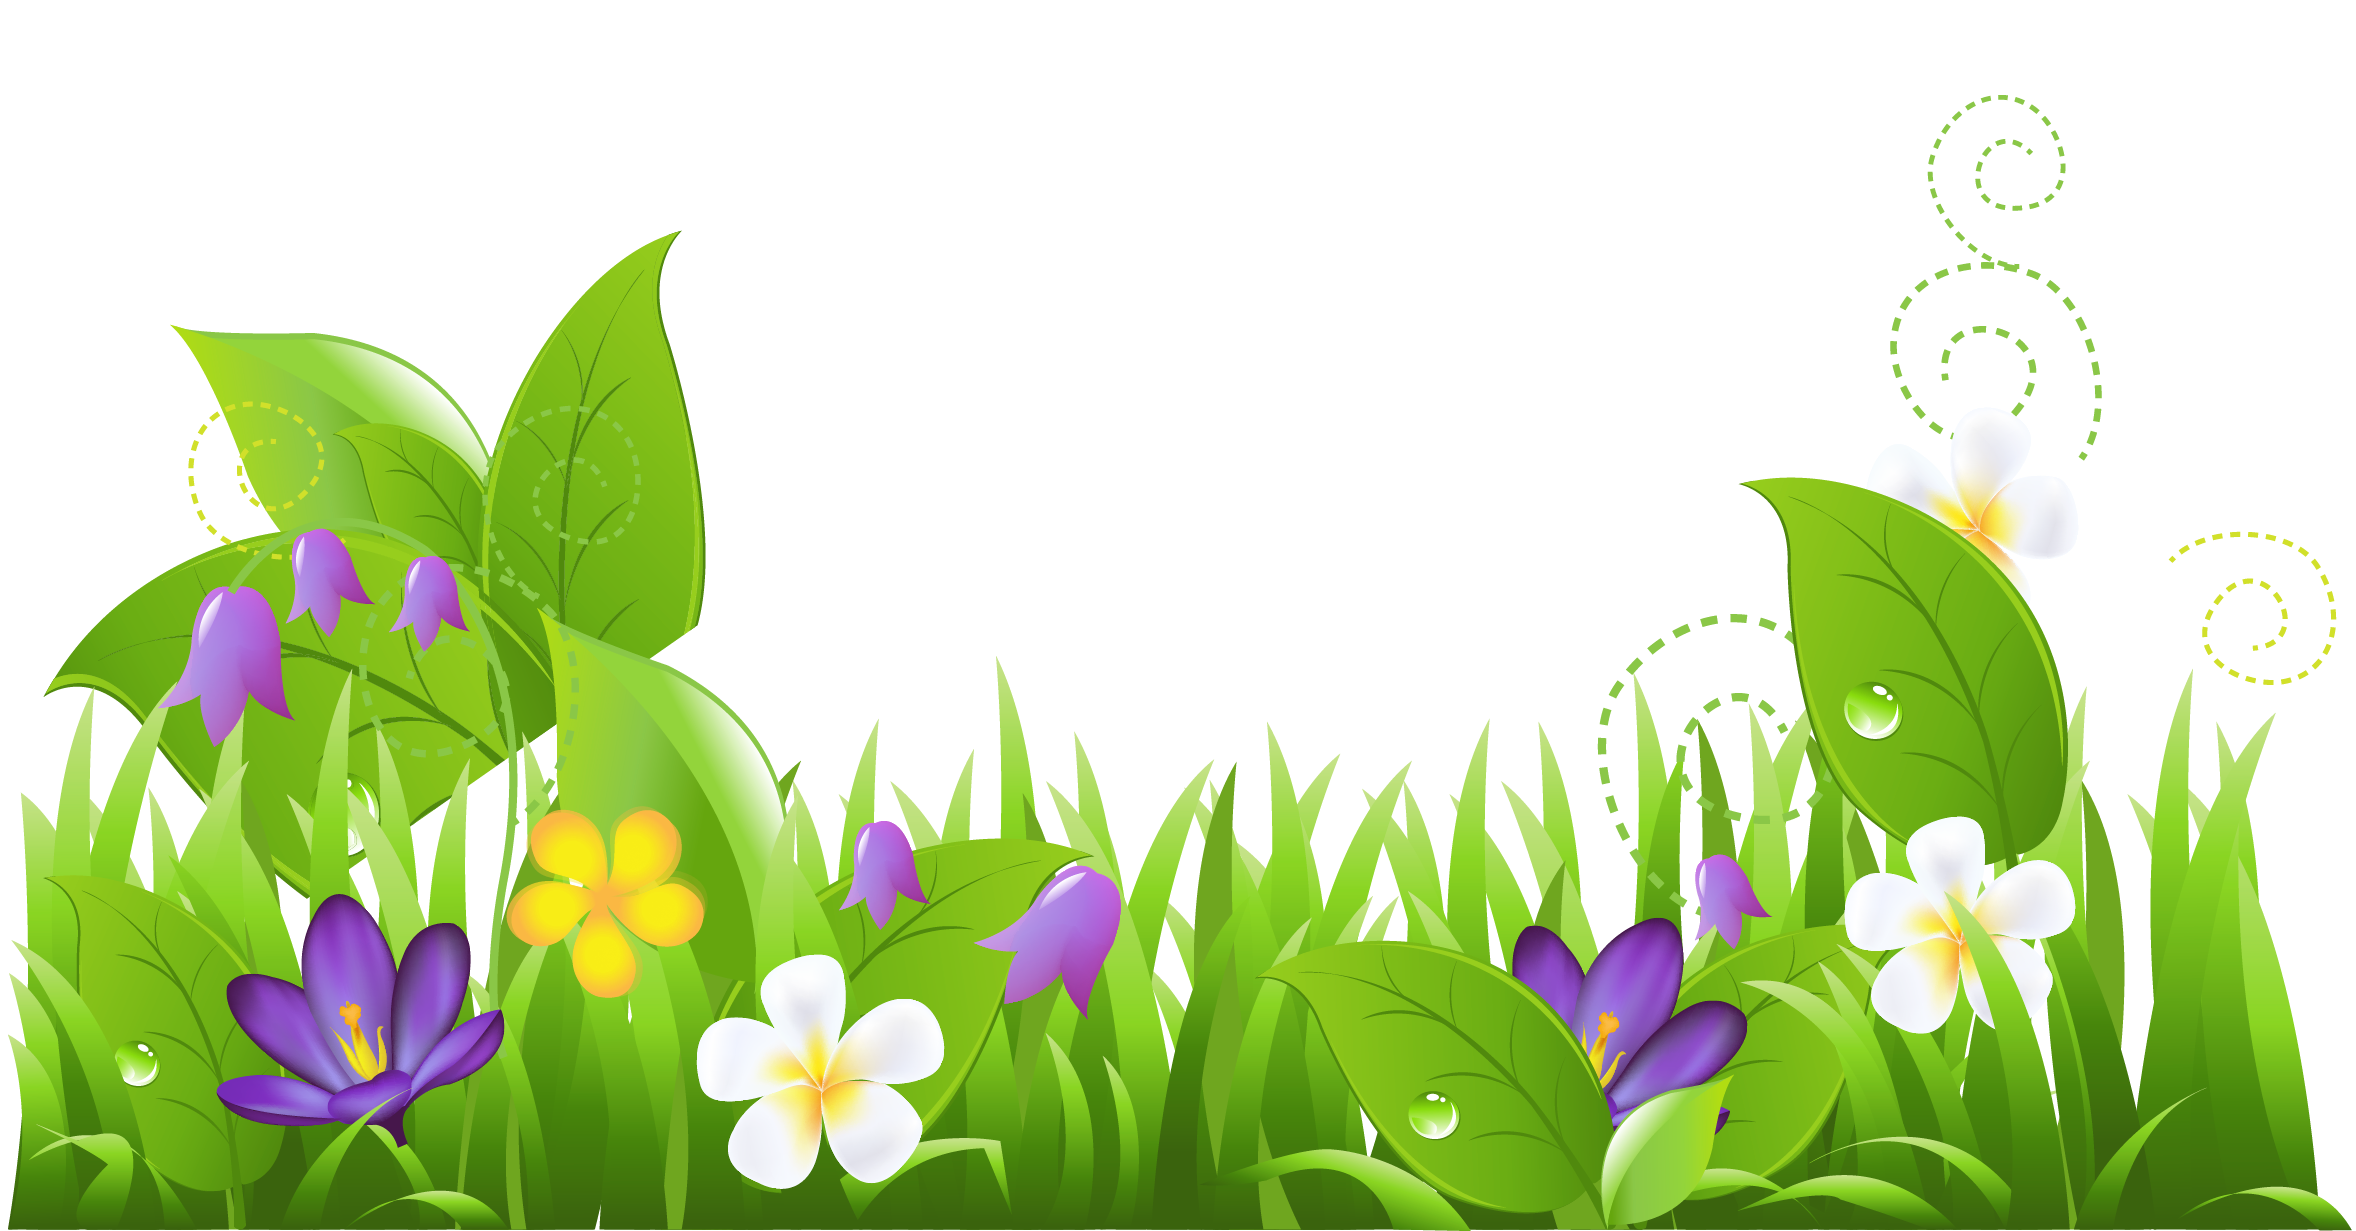 Grass and flowers clipart clipart clipart